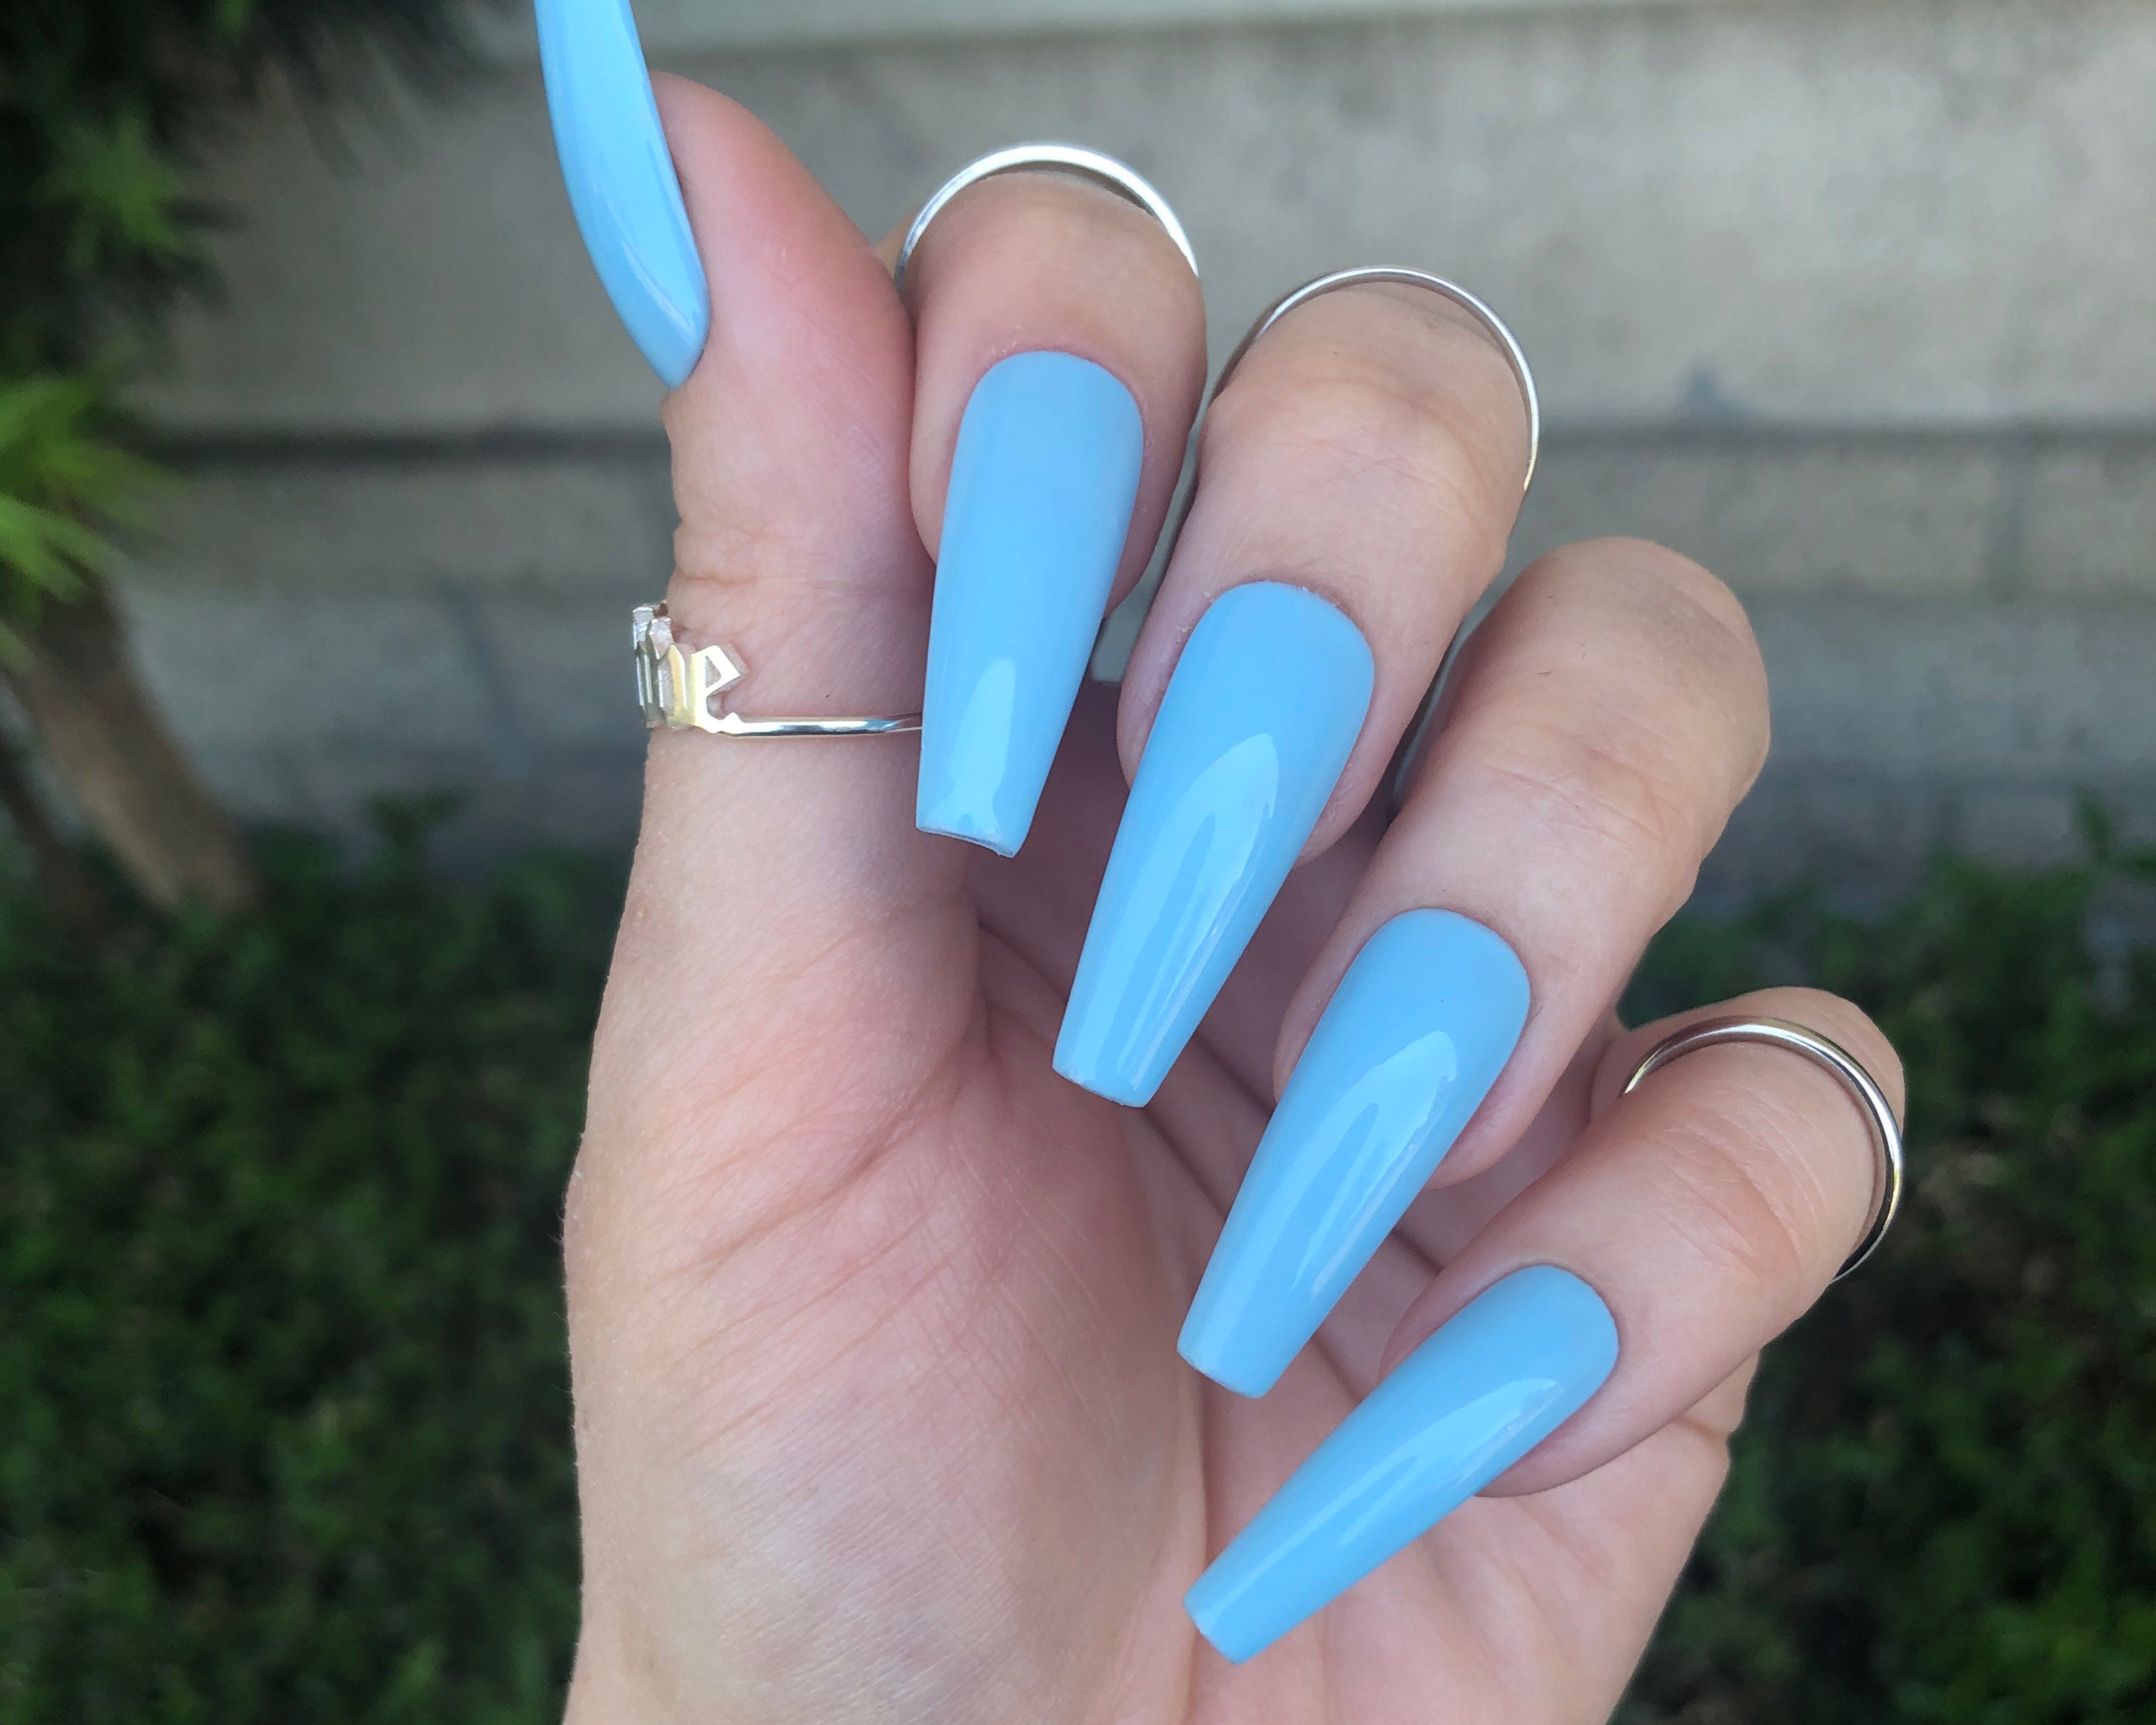 3. Sky Blue Coffin Nails with White Floral Design - wide 2